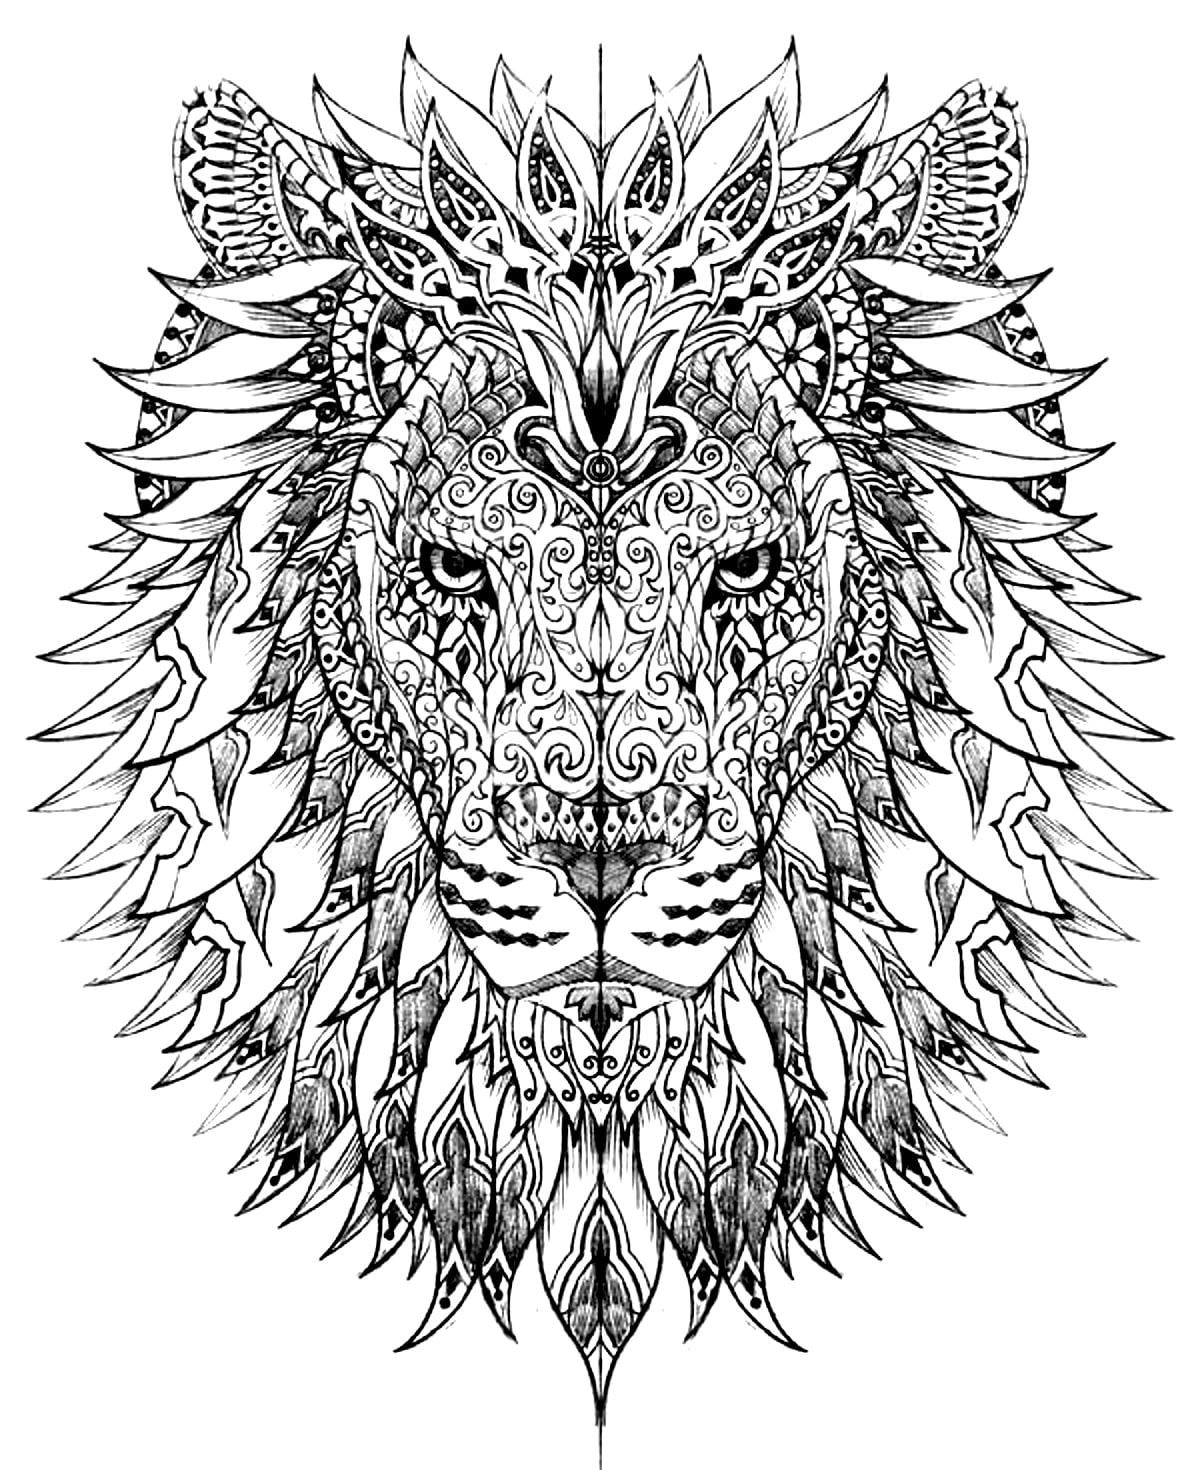 Animals | 50 Printable Adult Coloring Pages That Will Help You De-Stress |  POPSUGAR Smart Living Photo 2